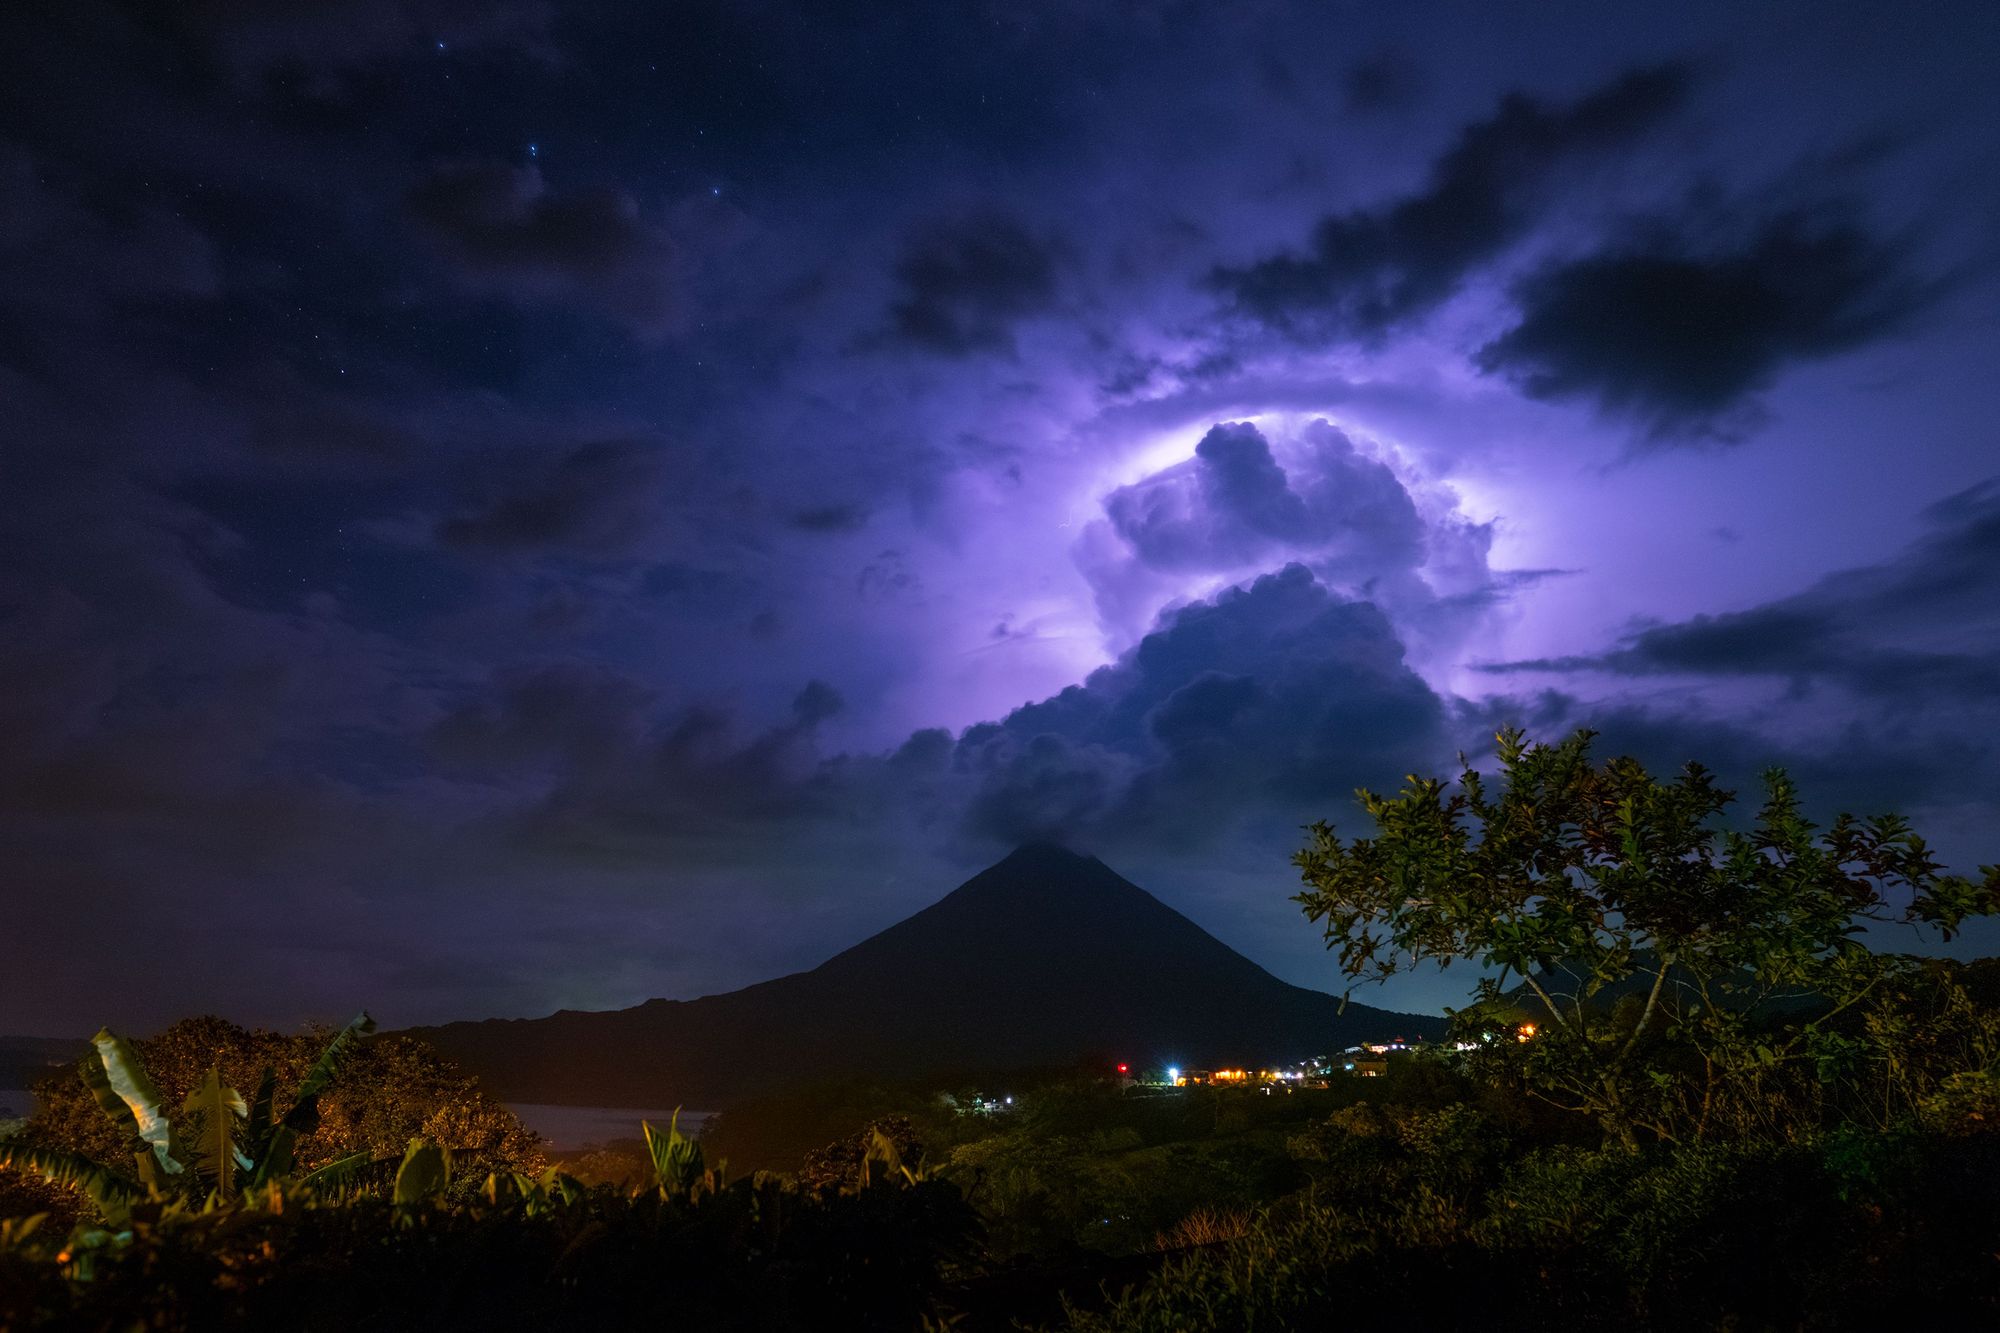 A thunderstorm over Mount Arenal, one of Costa Rica's most distinctive volcanoes